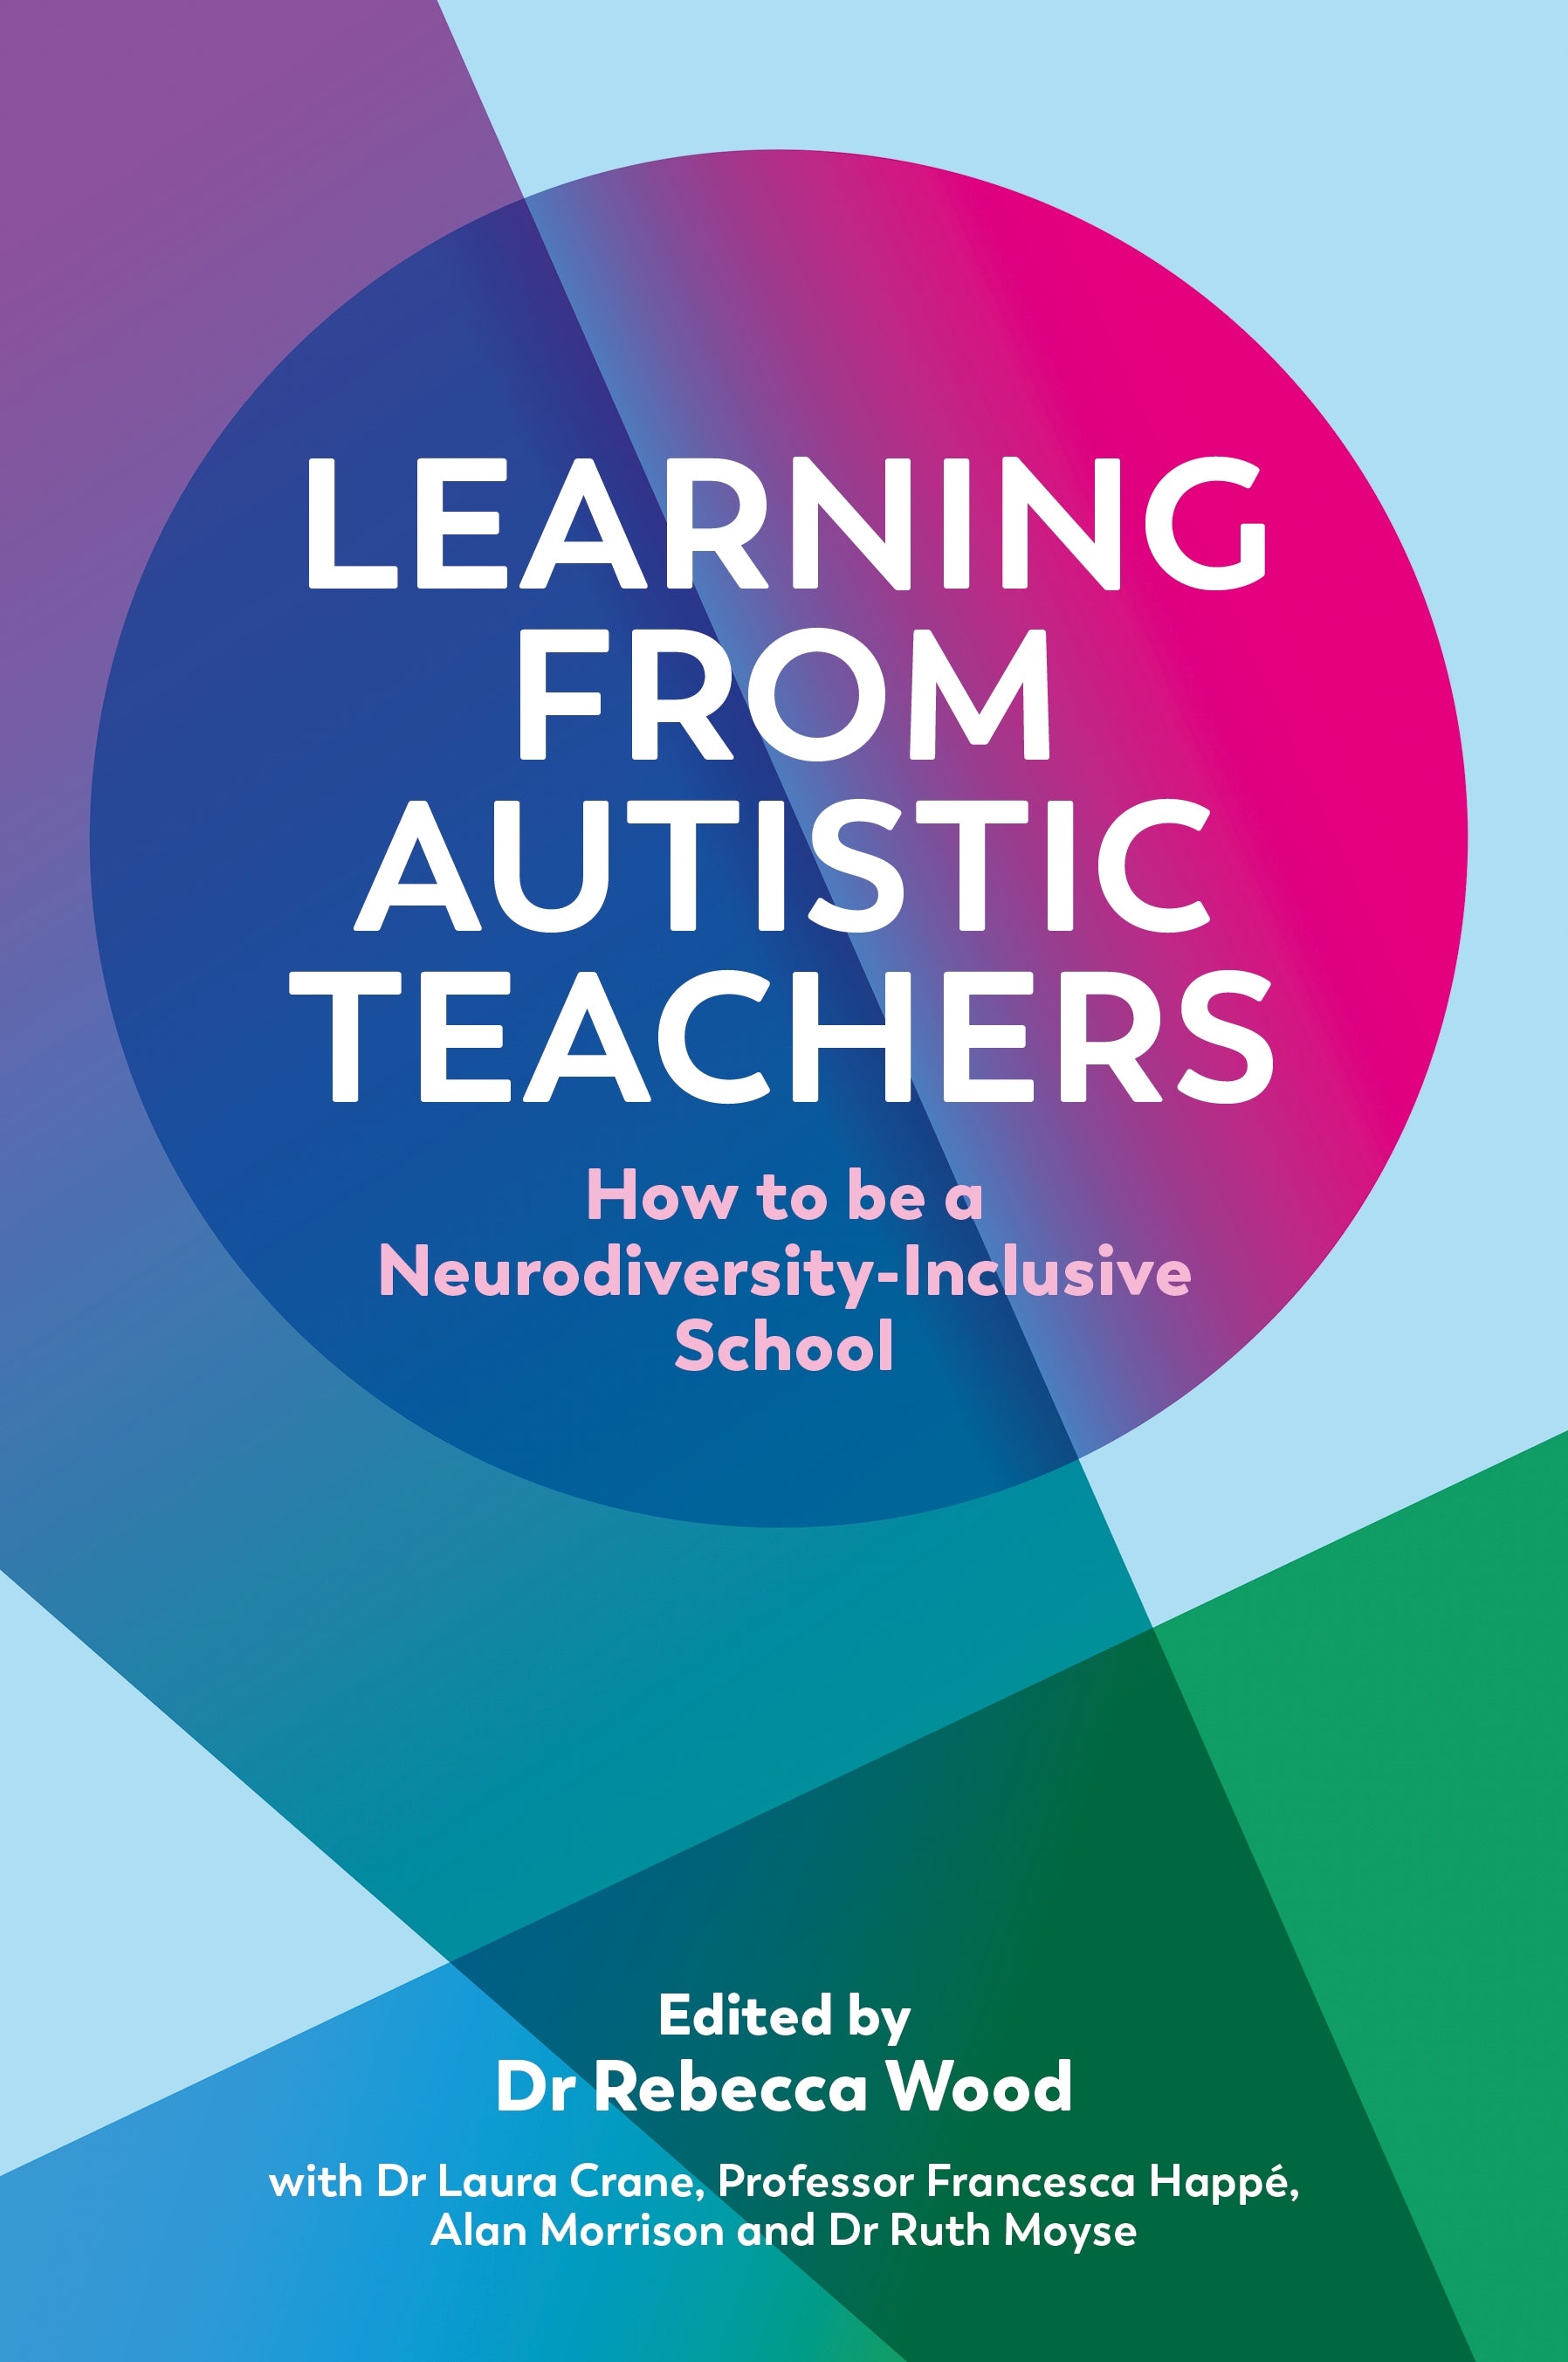 Learning From Autistic Teachers by Rebecca Wood, Dr Laura Crane, Francesca Happé, Alan Morrison, Ruth Moyse, No Author Listed